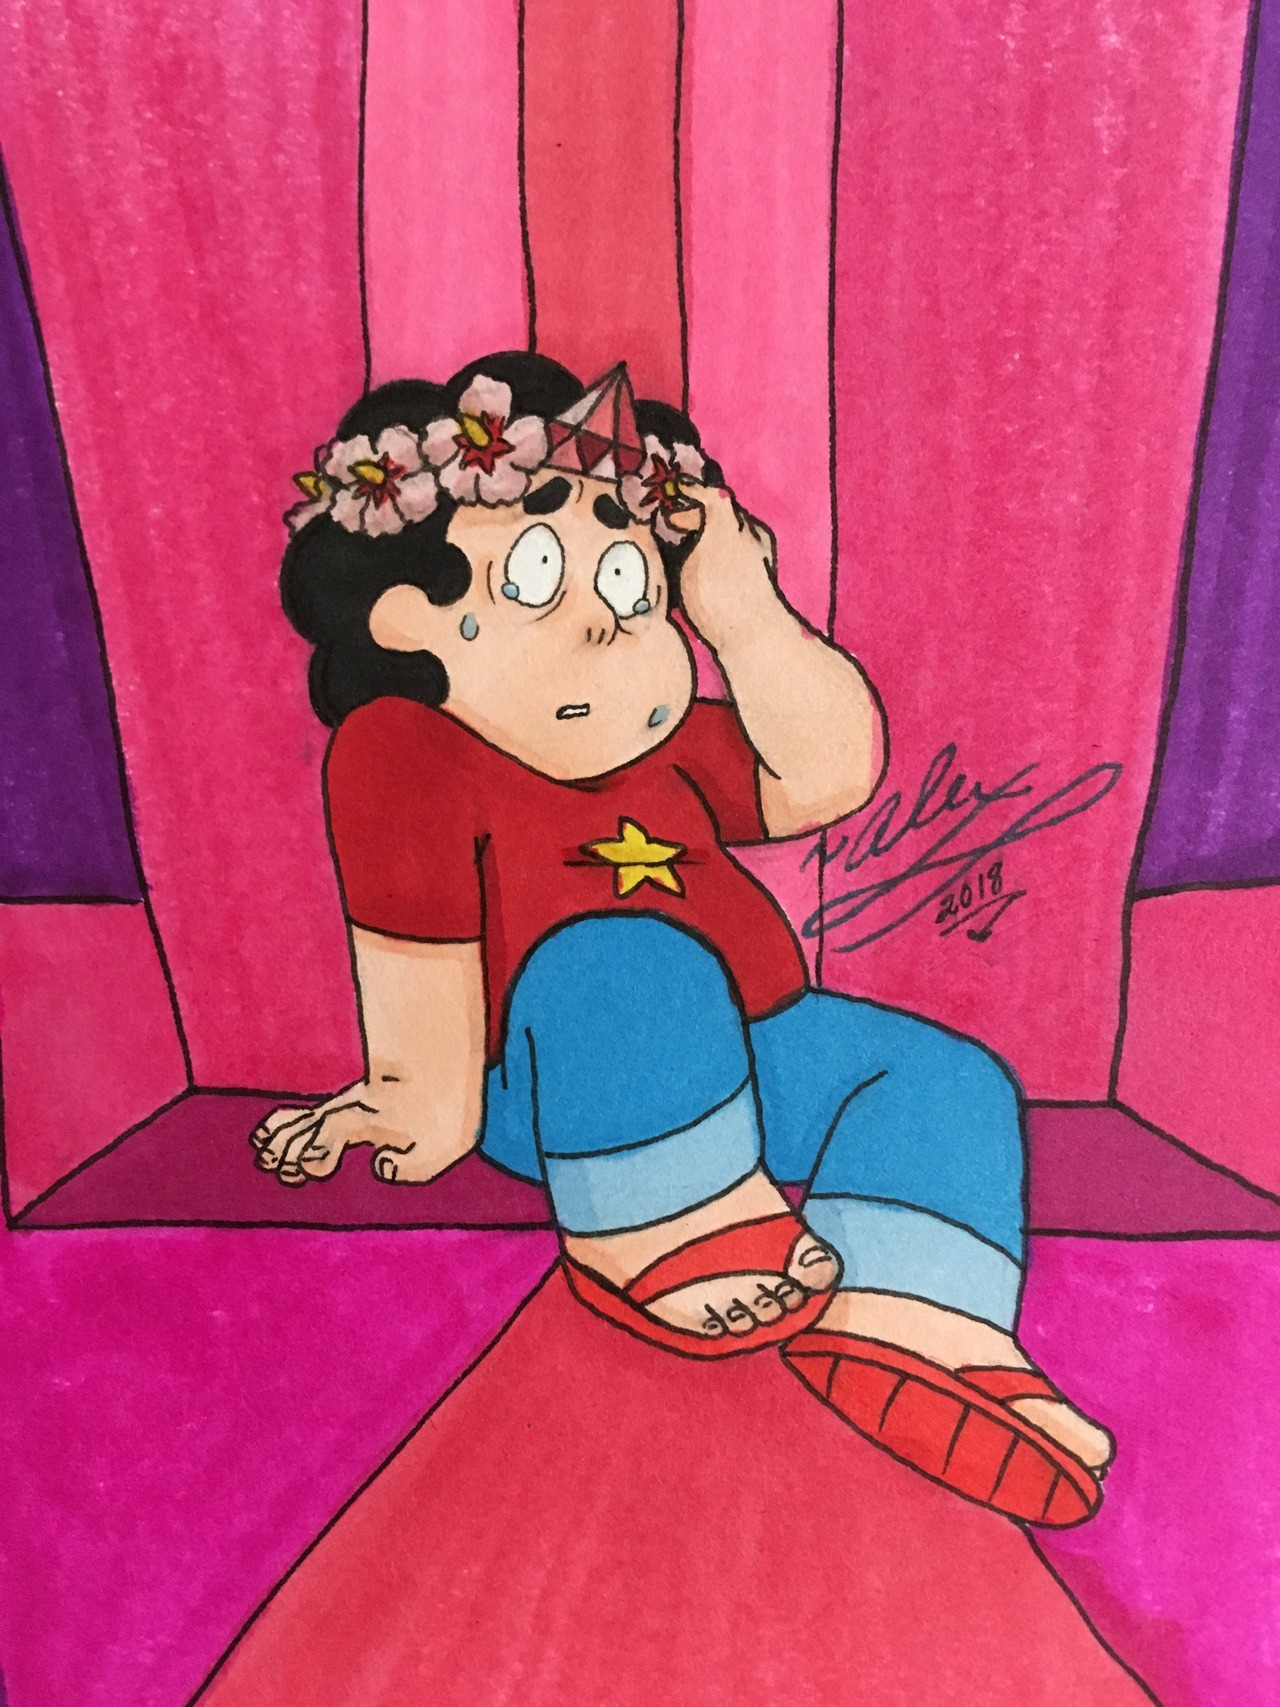 The name Steven means “crown” and istfg if that was intended to be foreshadowing then hats off to @stevencrewniverse because that is a level of foreshadowing that I could only dream off! Steven...